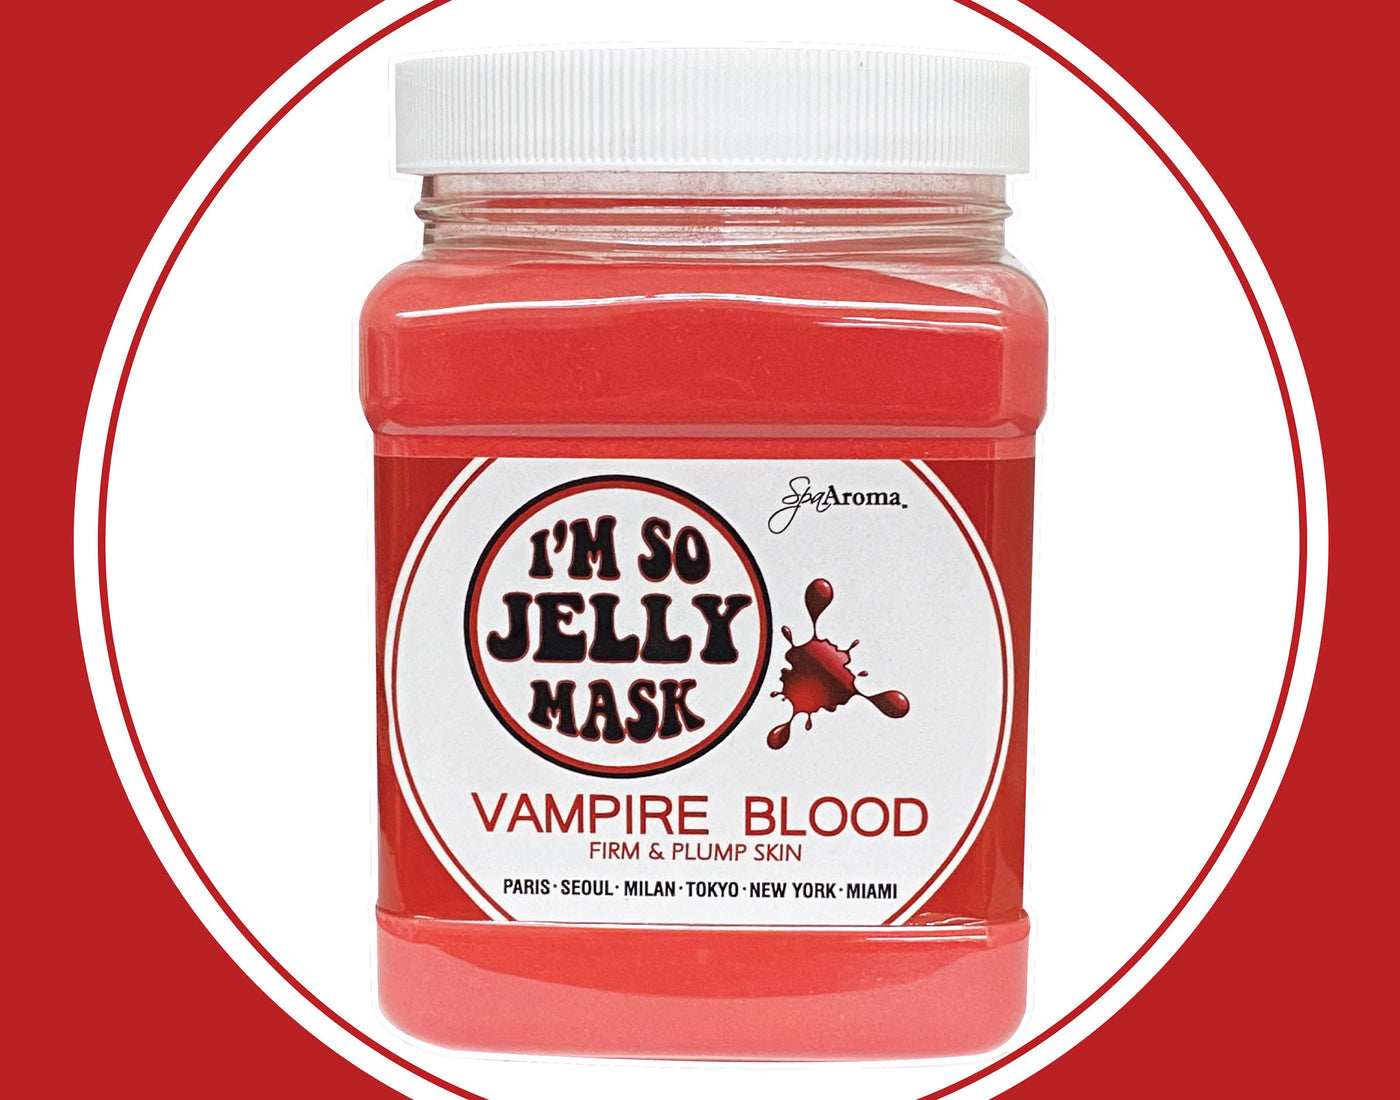 VAMPIRE BLOOD Firm + Plump  I'M SO JELLY (hydrojelly) MASK